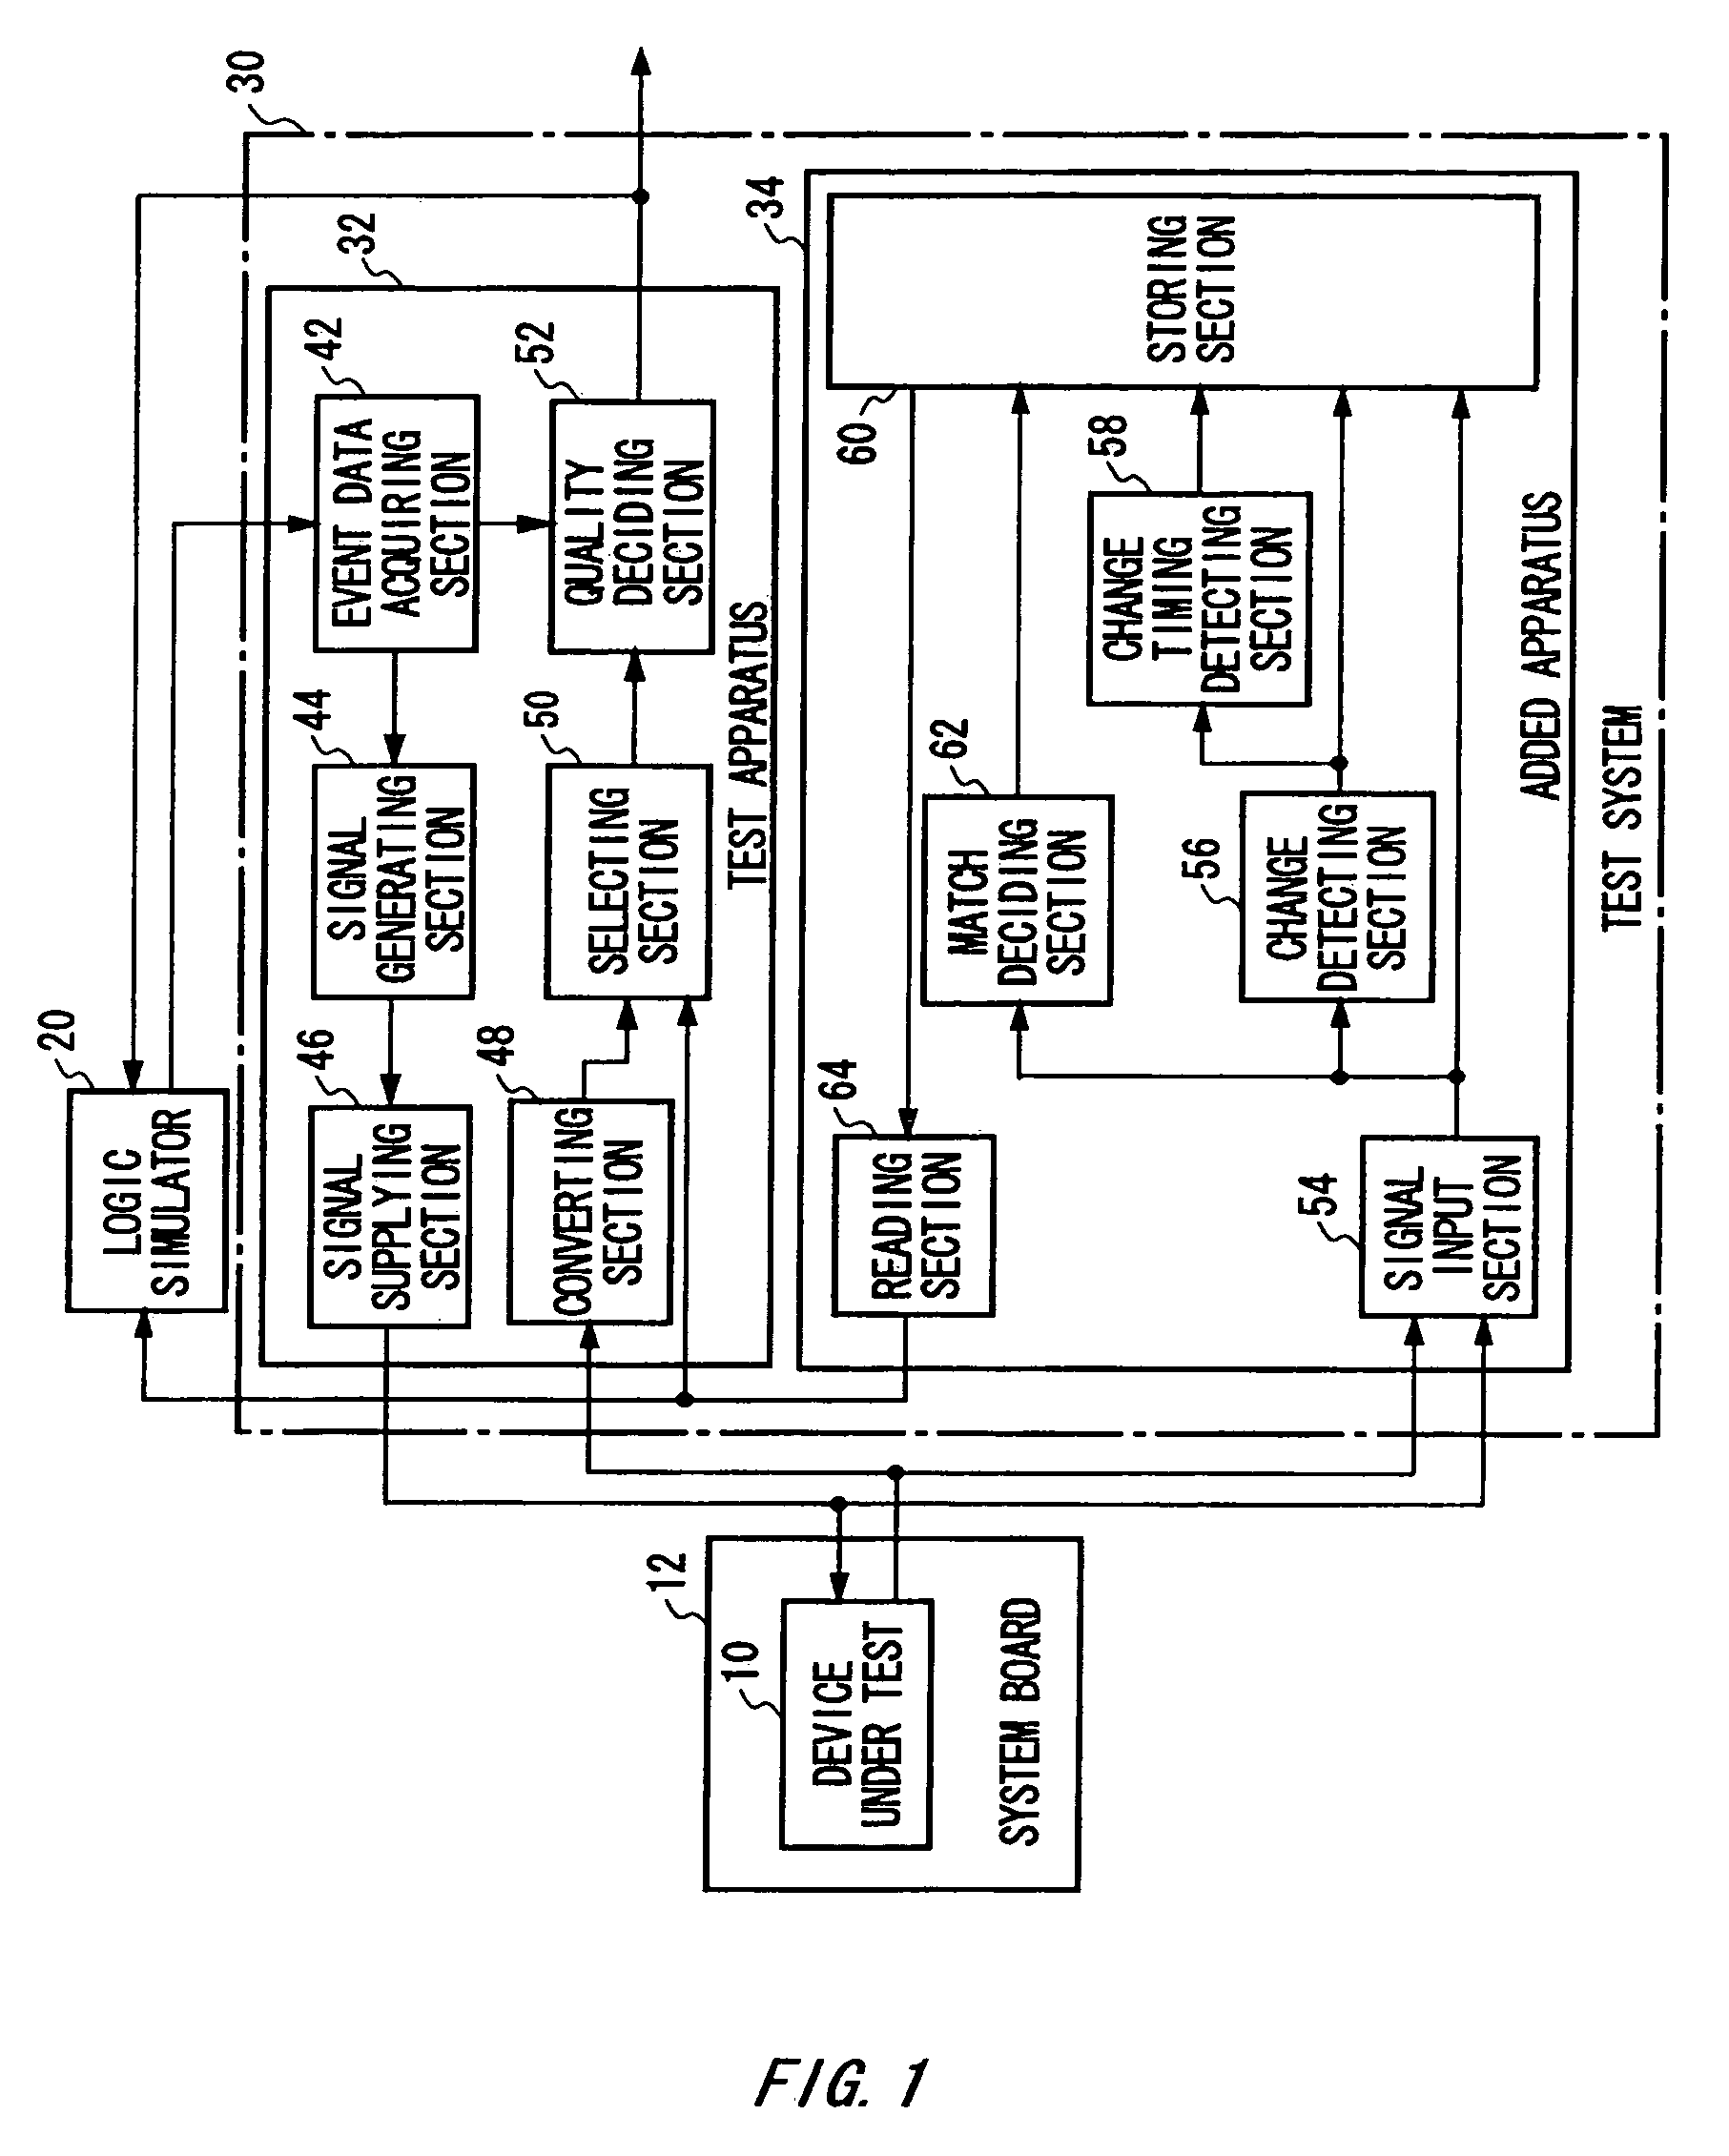 Test system, added apparatus, and test method